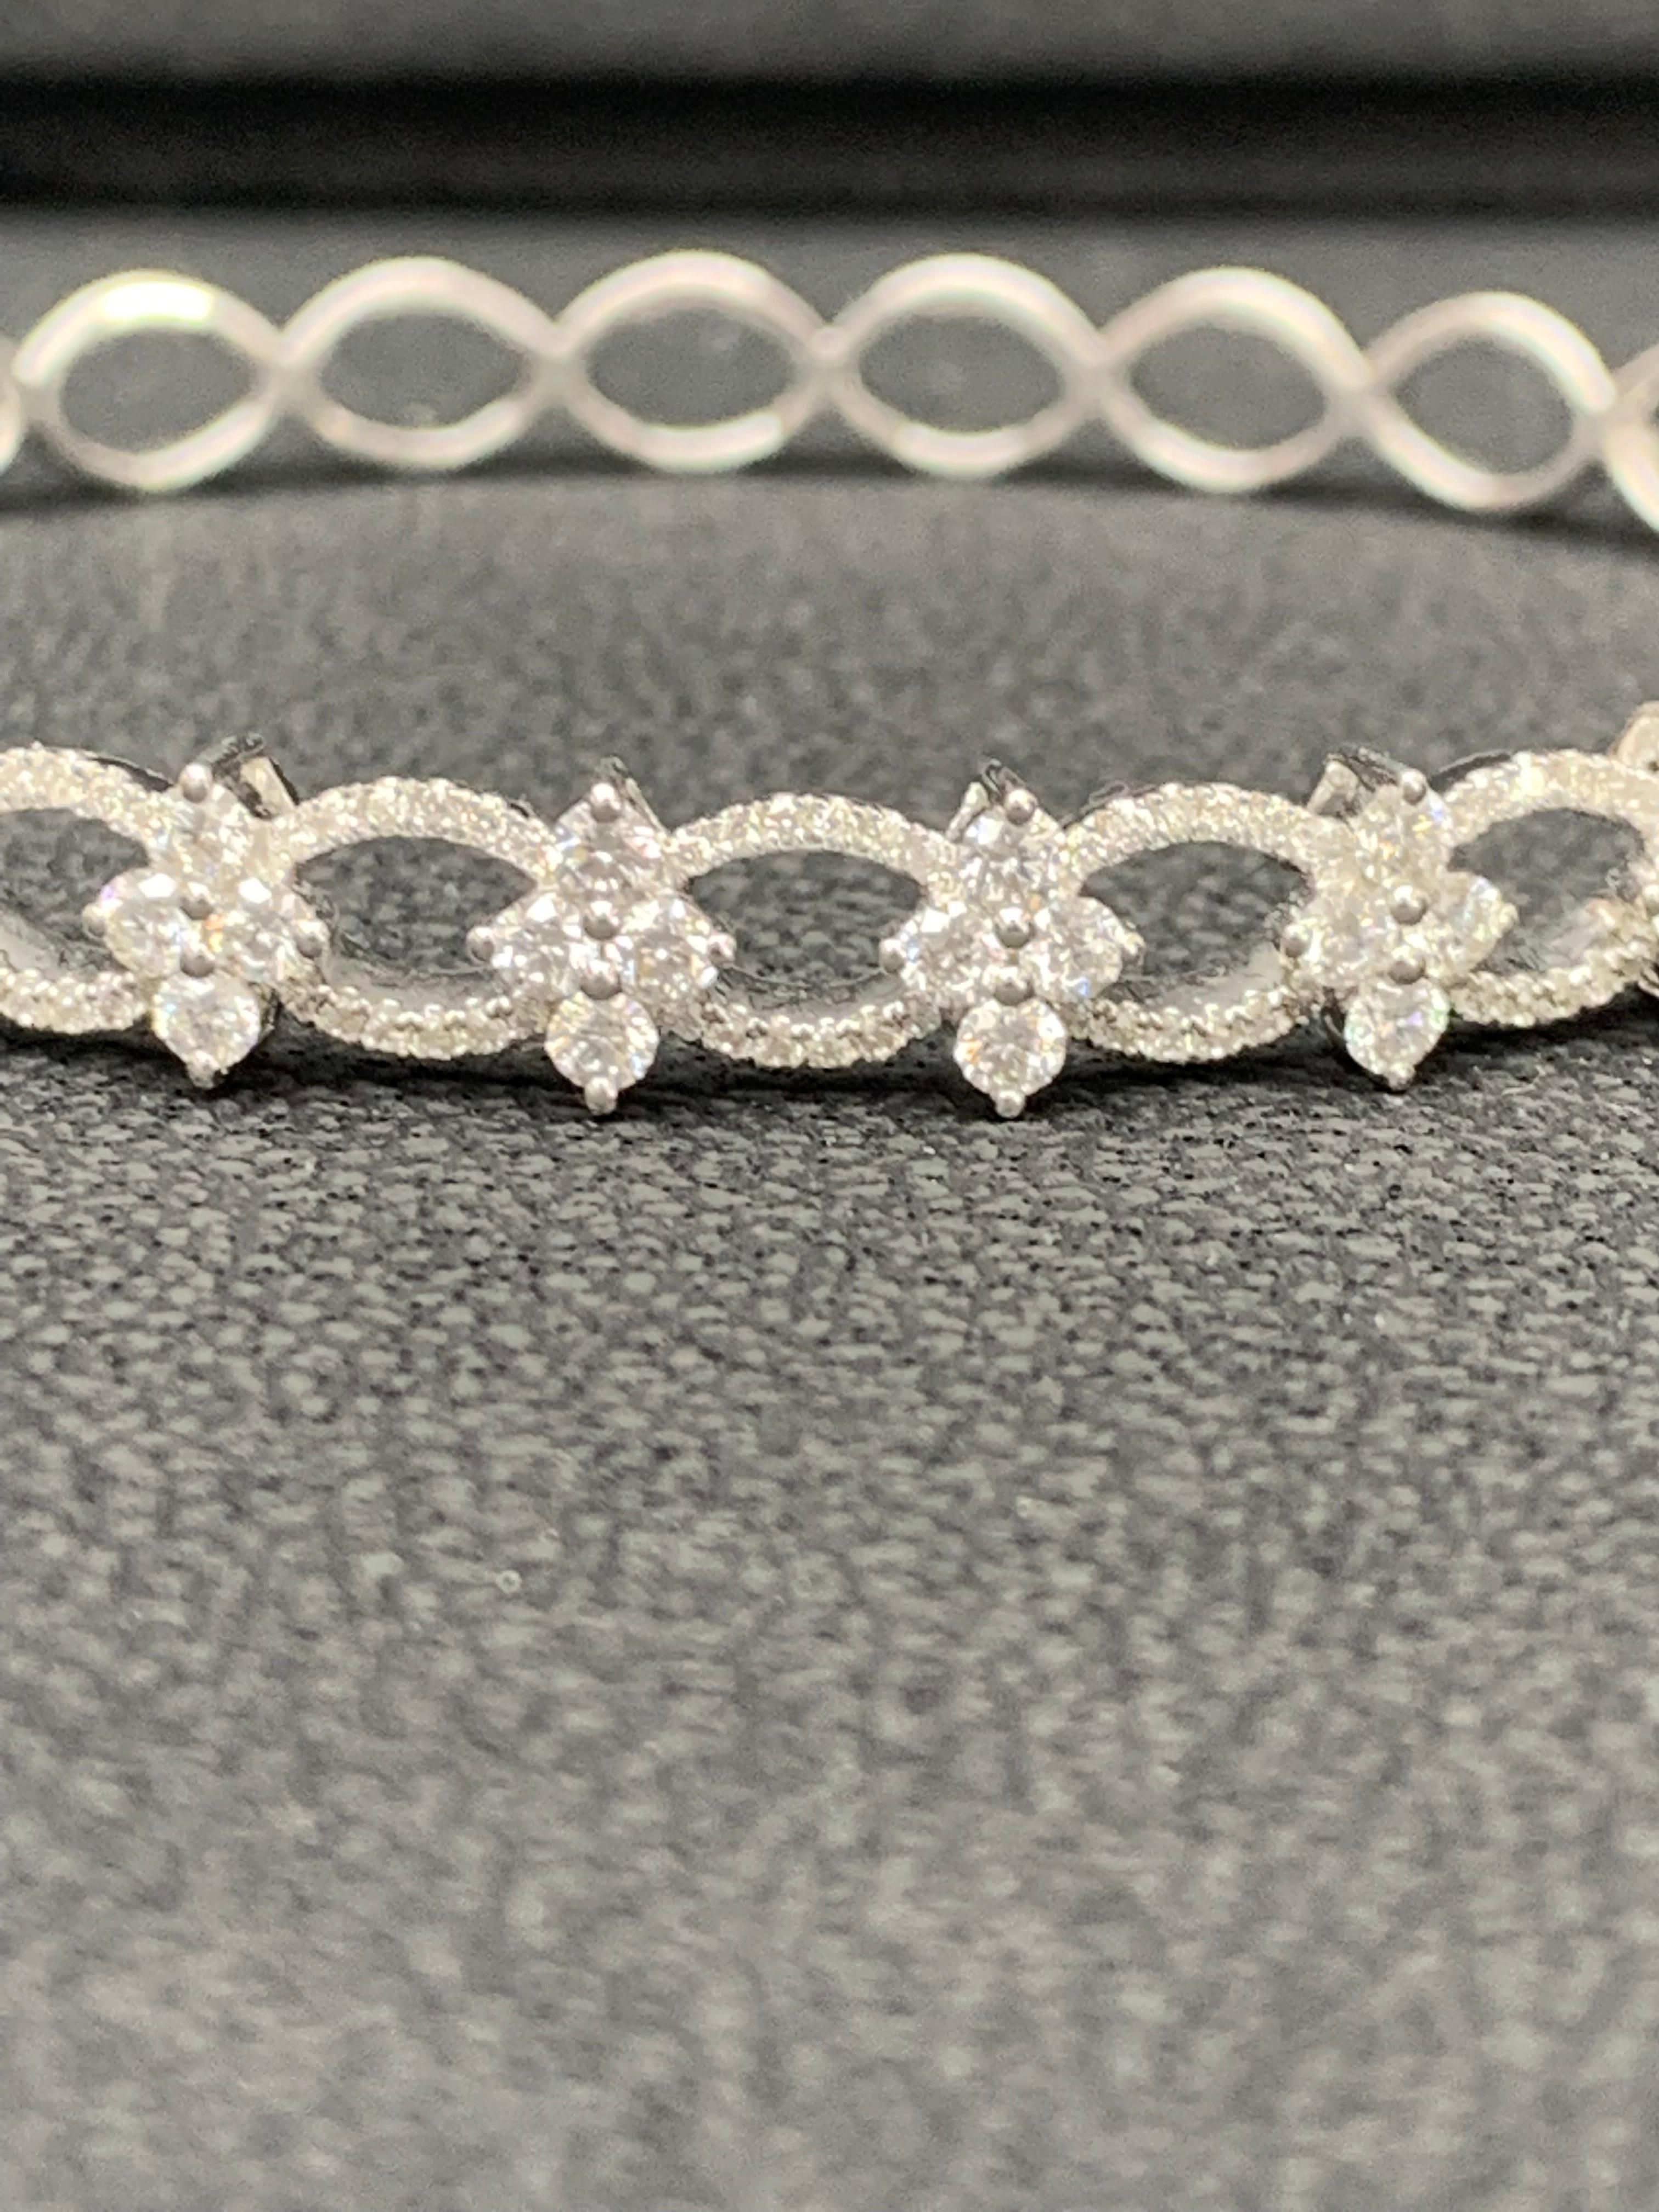 A beautiful and important bangle showcasing 2.00 carats of round brilliant diamonds big and small both, set in an intricately-designed open-work setting made in 18k white gold.

Style available in different price ranges. Prices are based on your